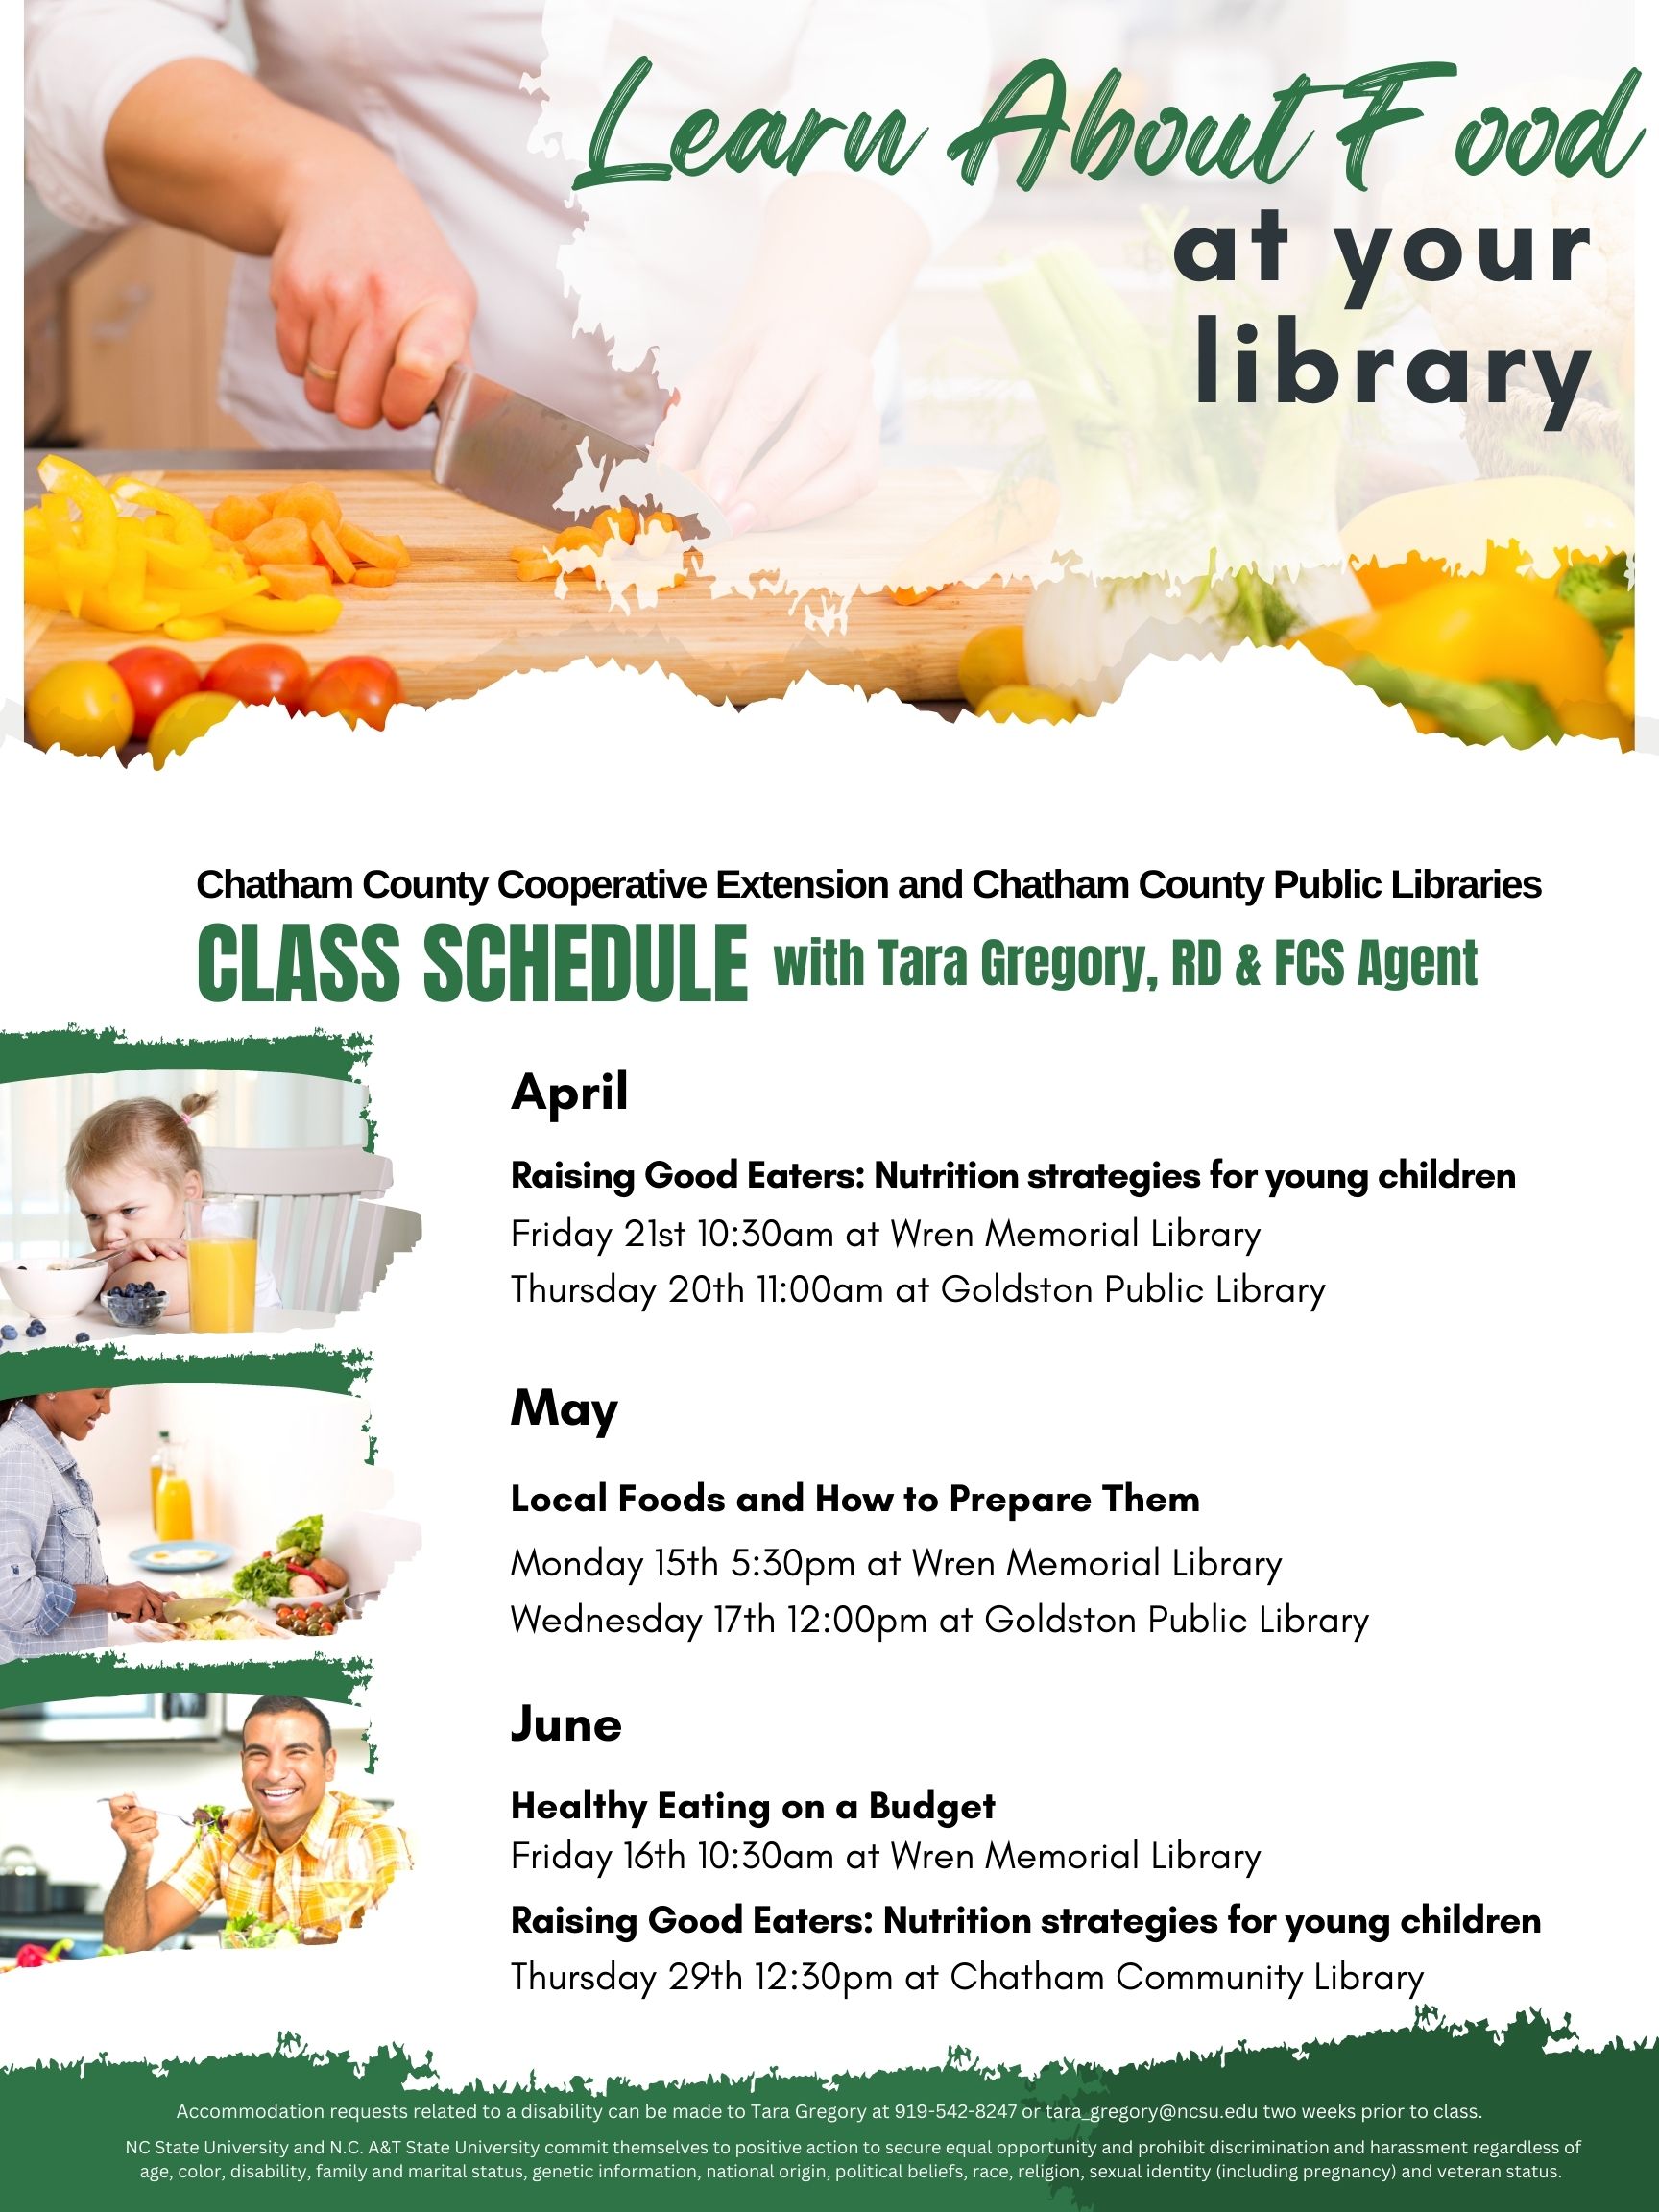 Learn about Food at your Library Flyer